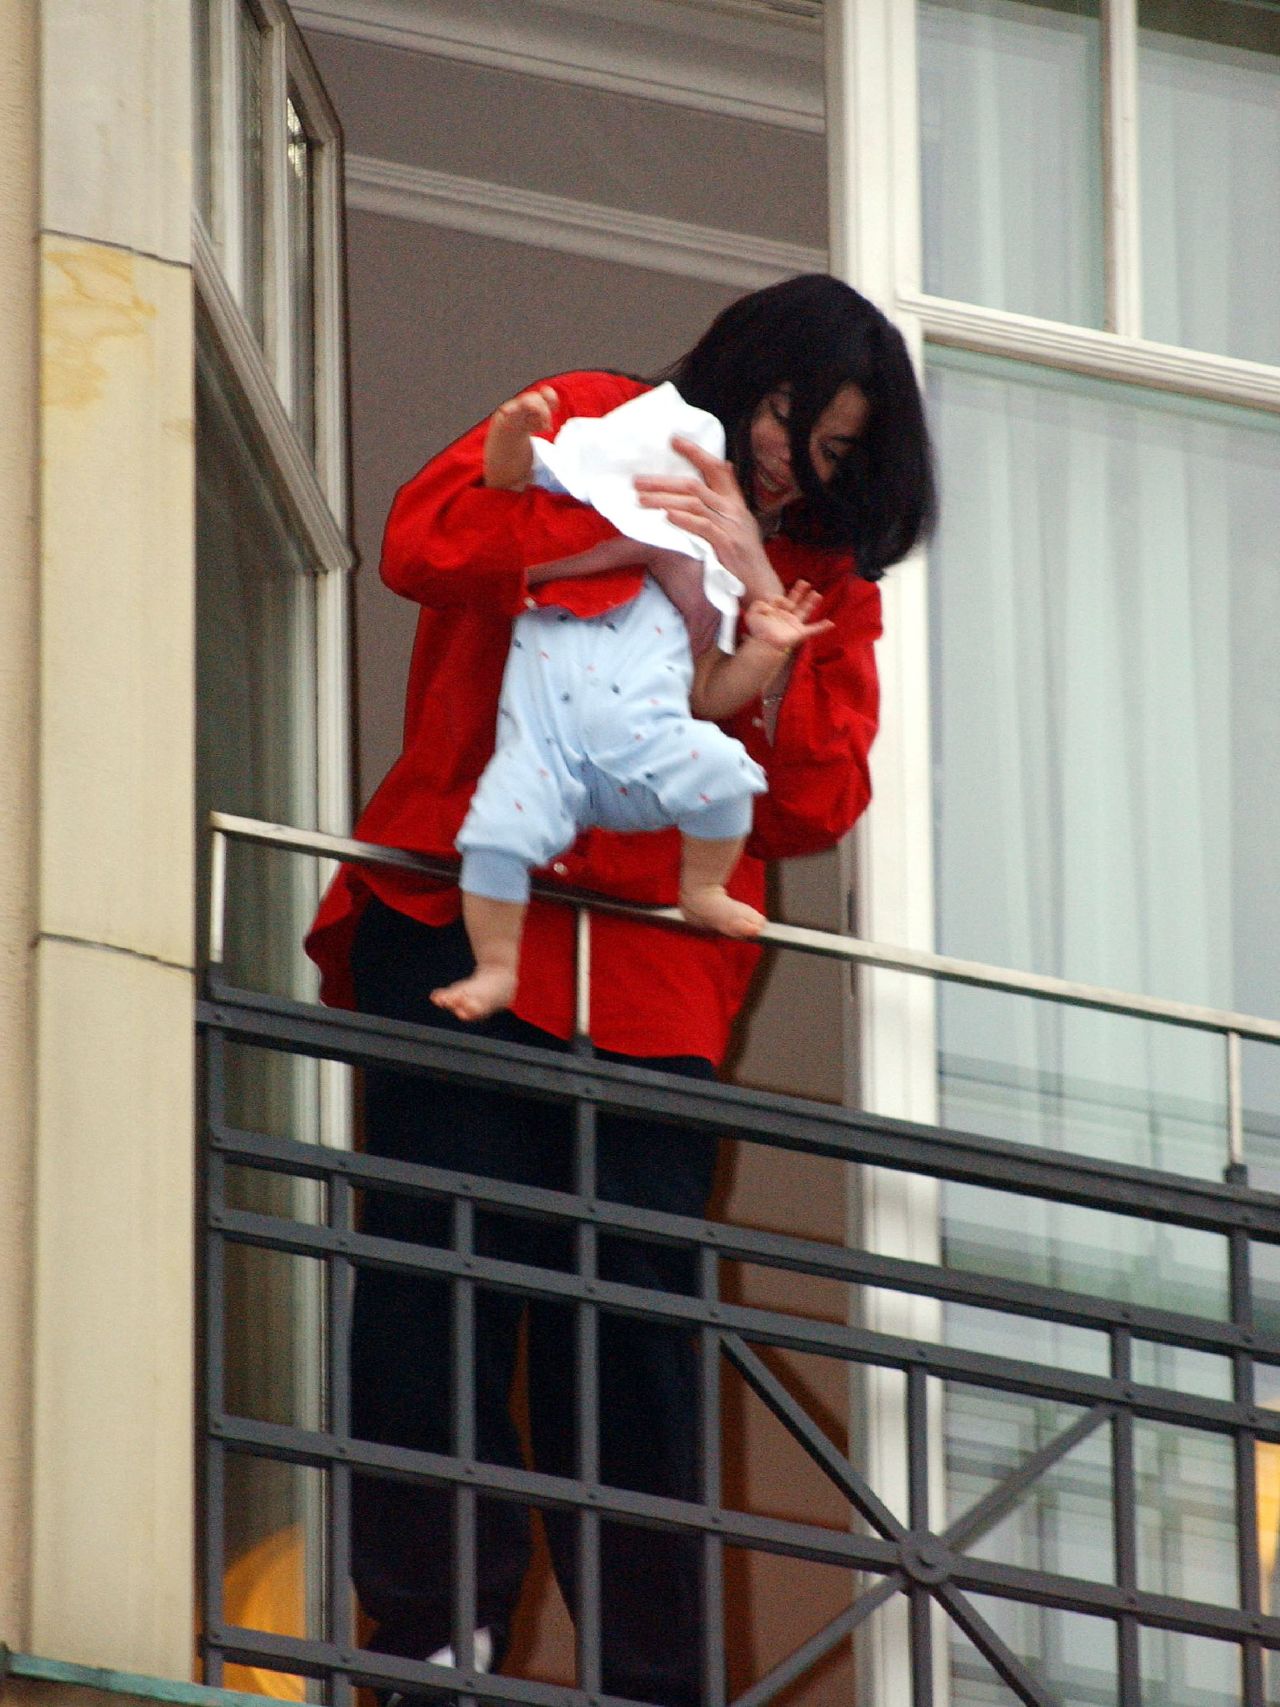 Remember when Singer Michael Jackson held his 8-month-old son Prince Michael II, aka Blanket, over the balcony of the Adlon Hotel in Berlin, Germany, in 2002? That didn't go over well.